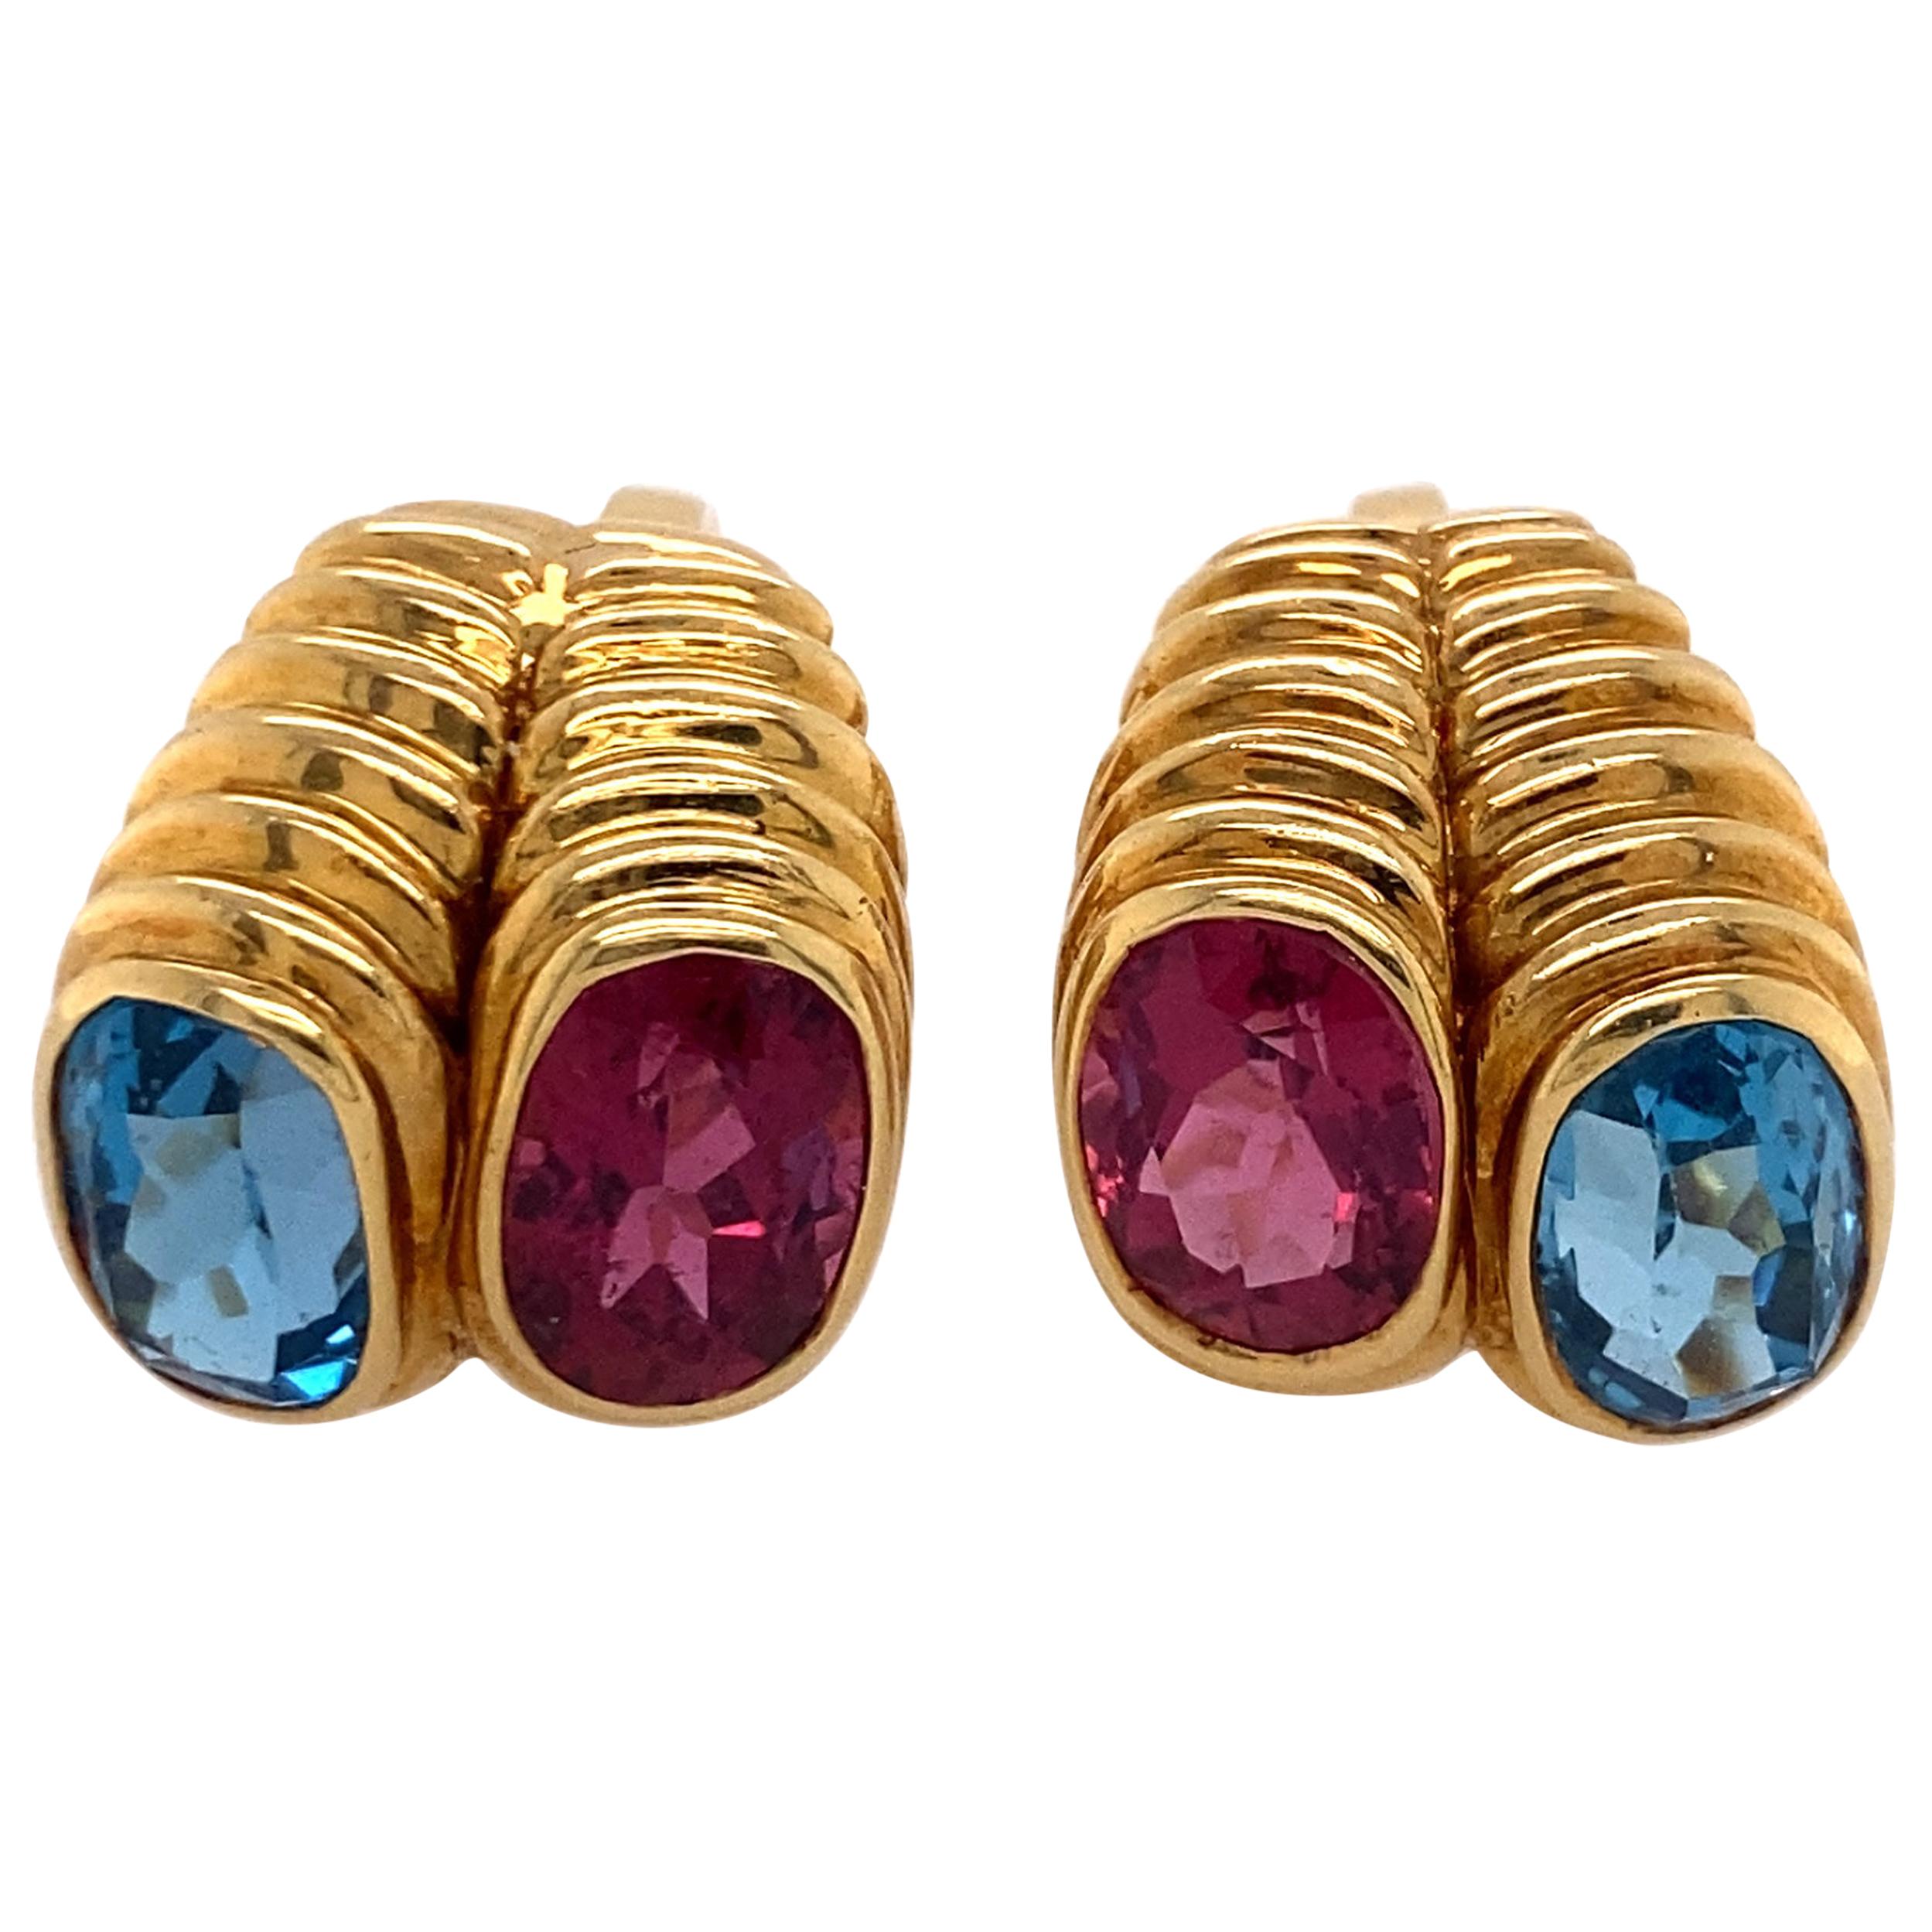 Blue Topaz and Pink Tourmaline Clip Earrings